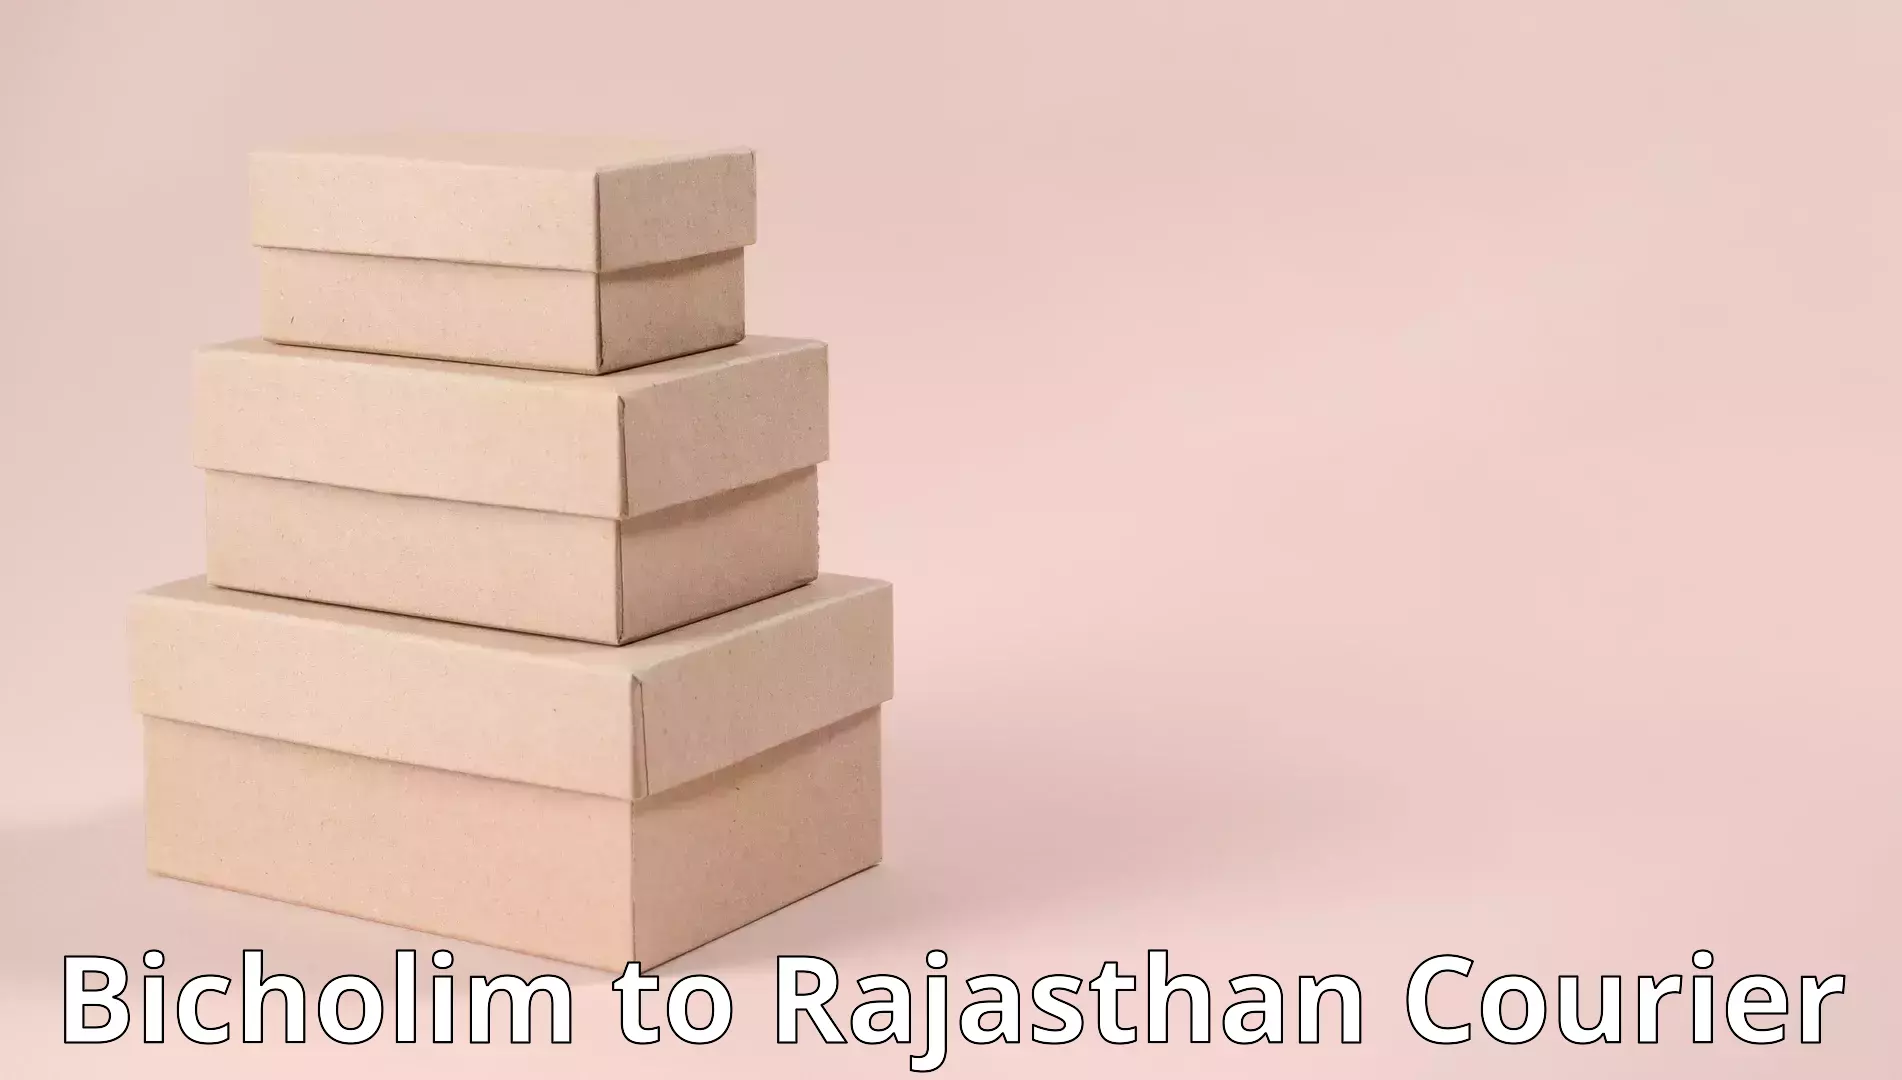 Home relocation experts Bicholim to Rajasthan